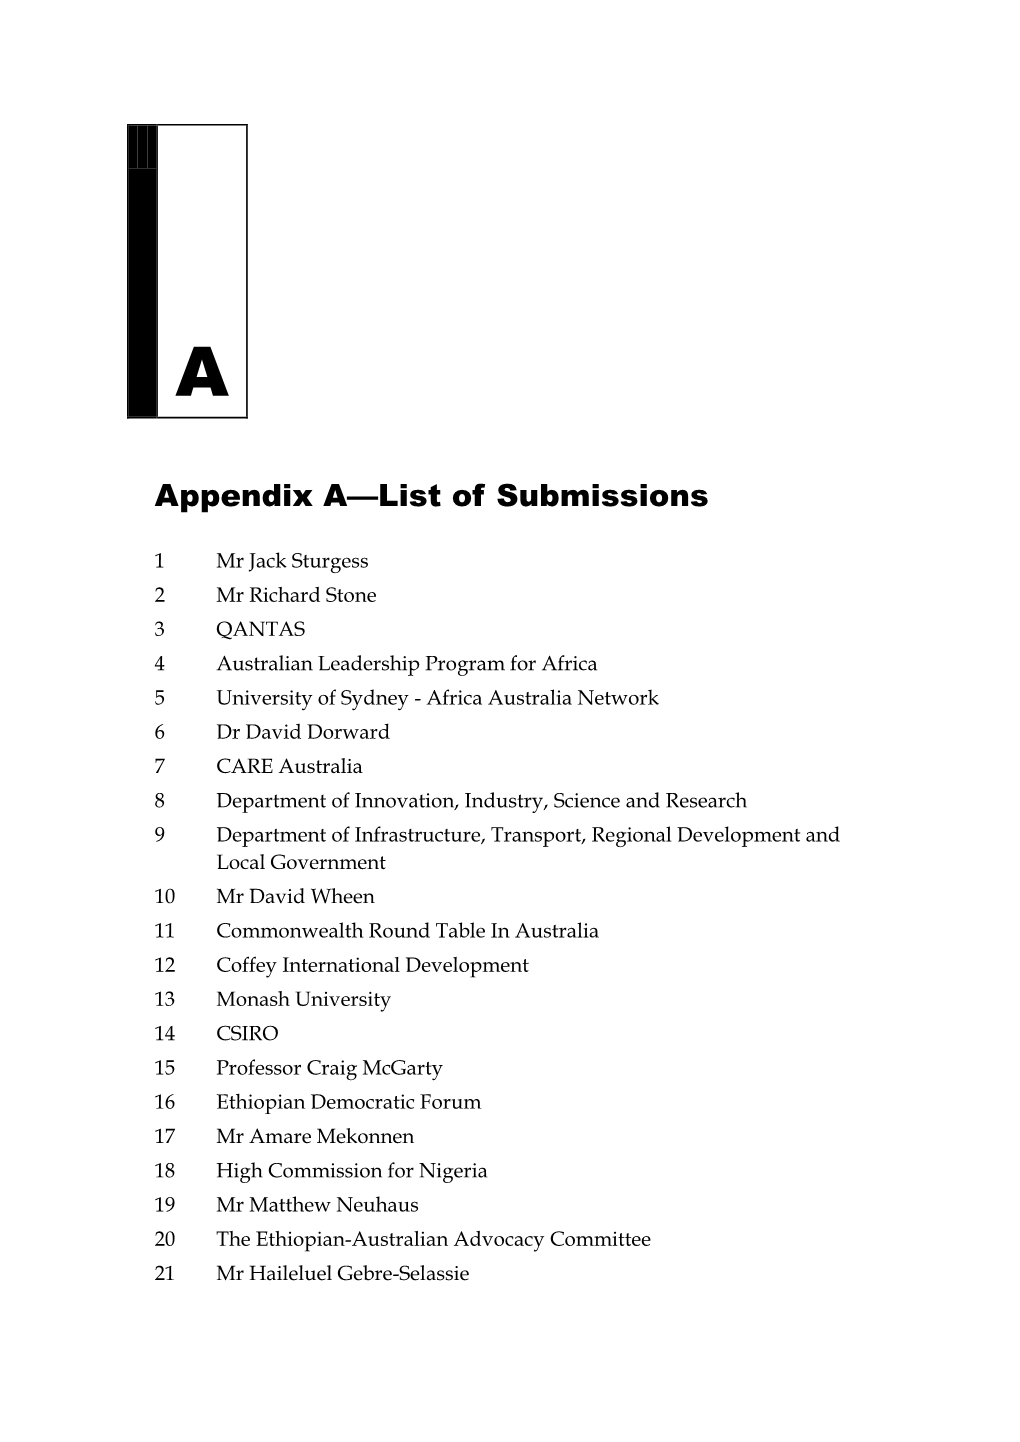 Appendix A: List of Submissions